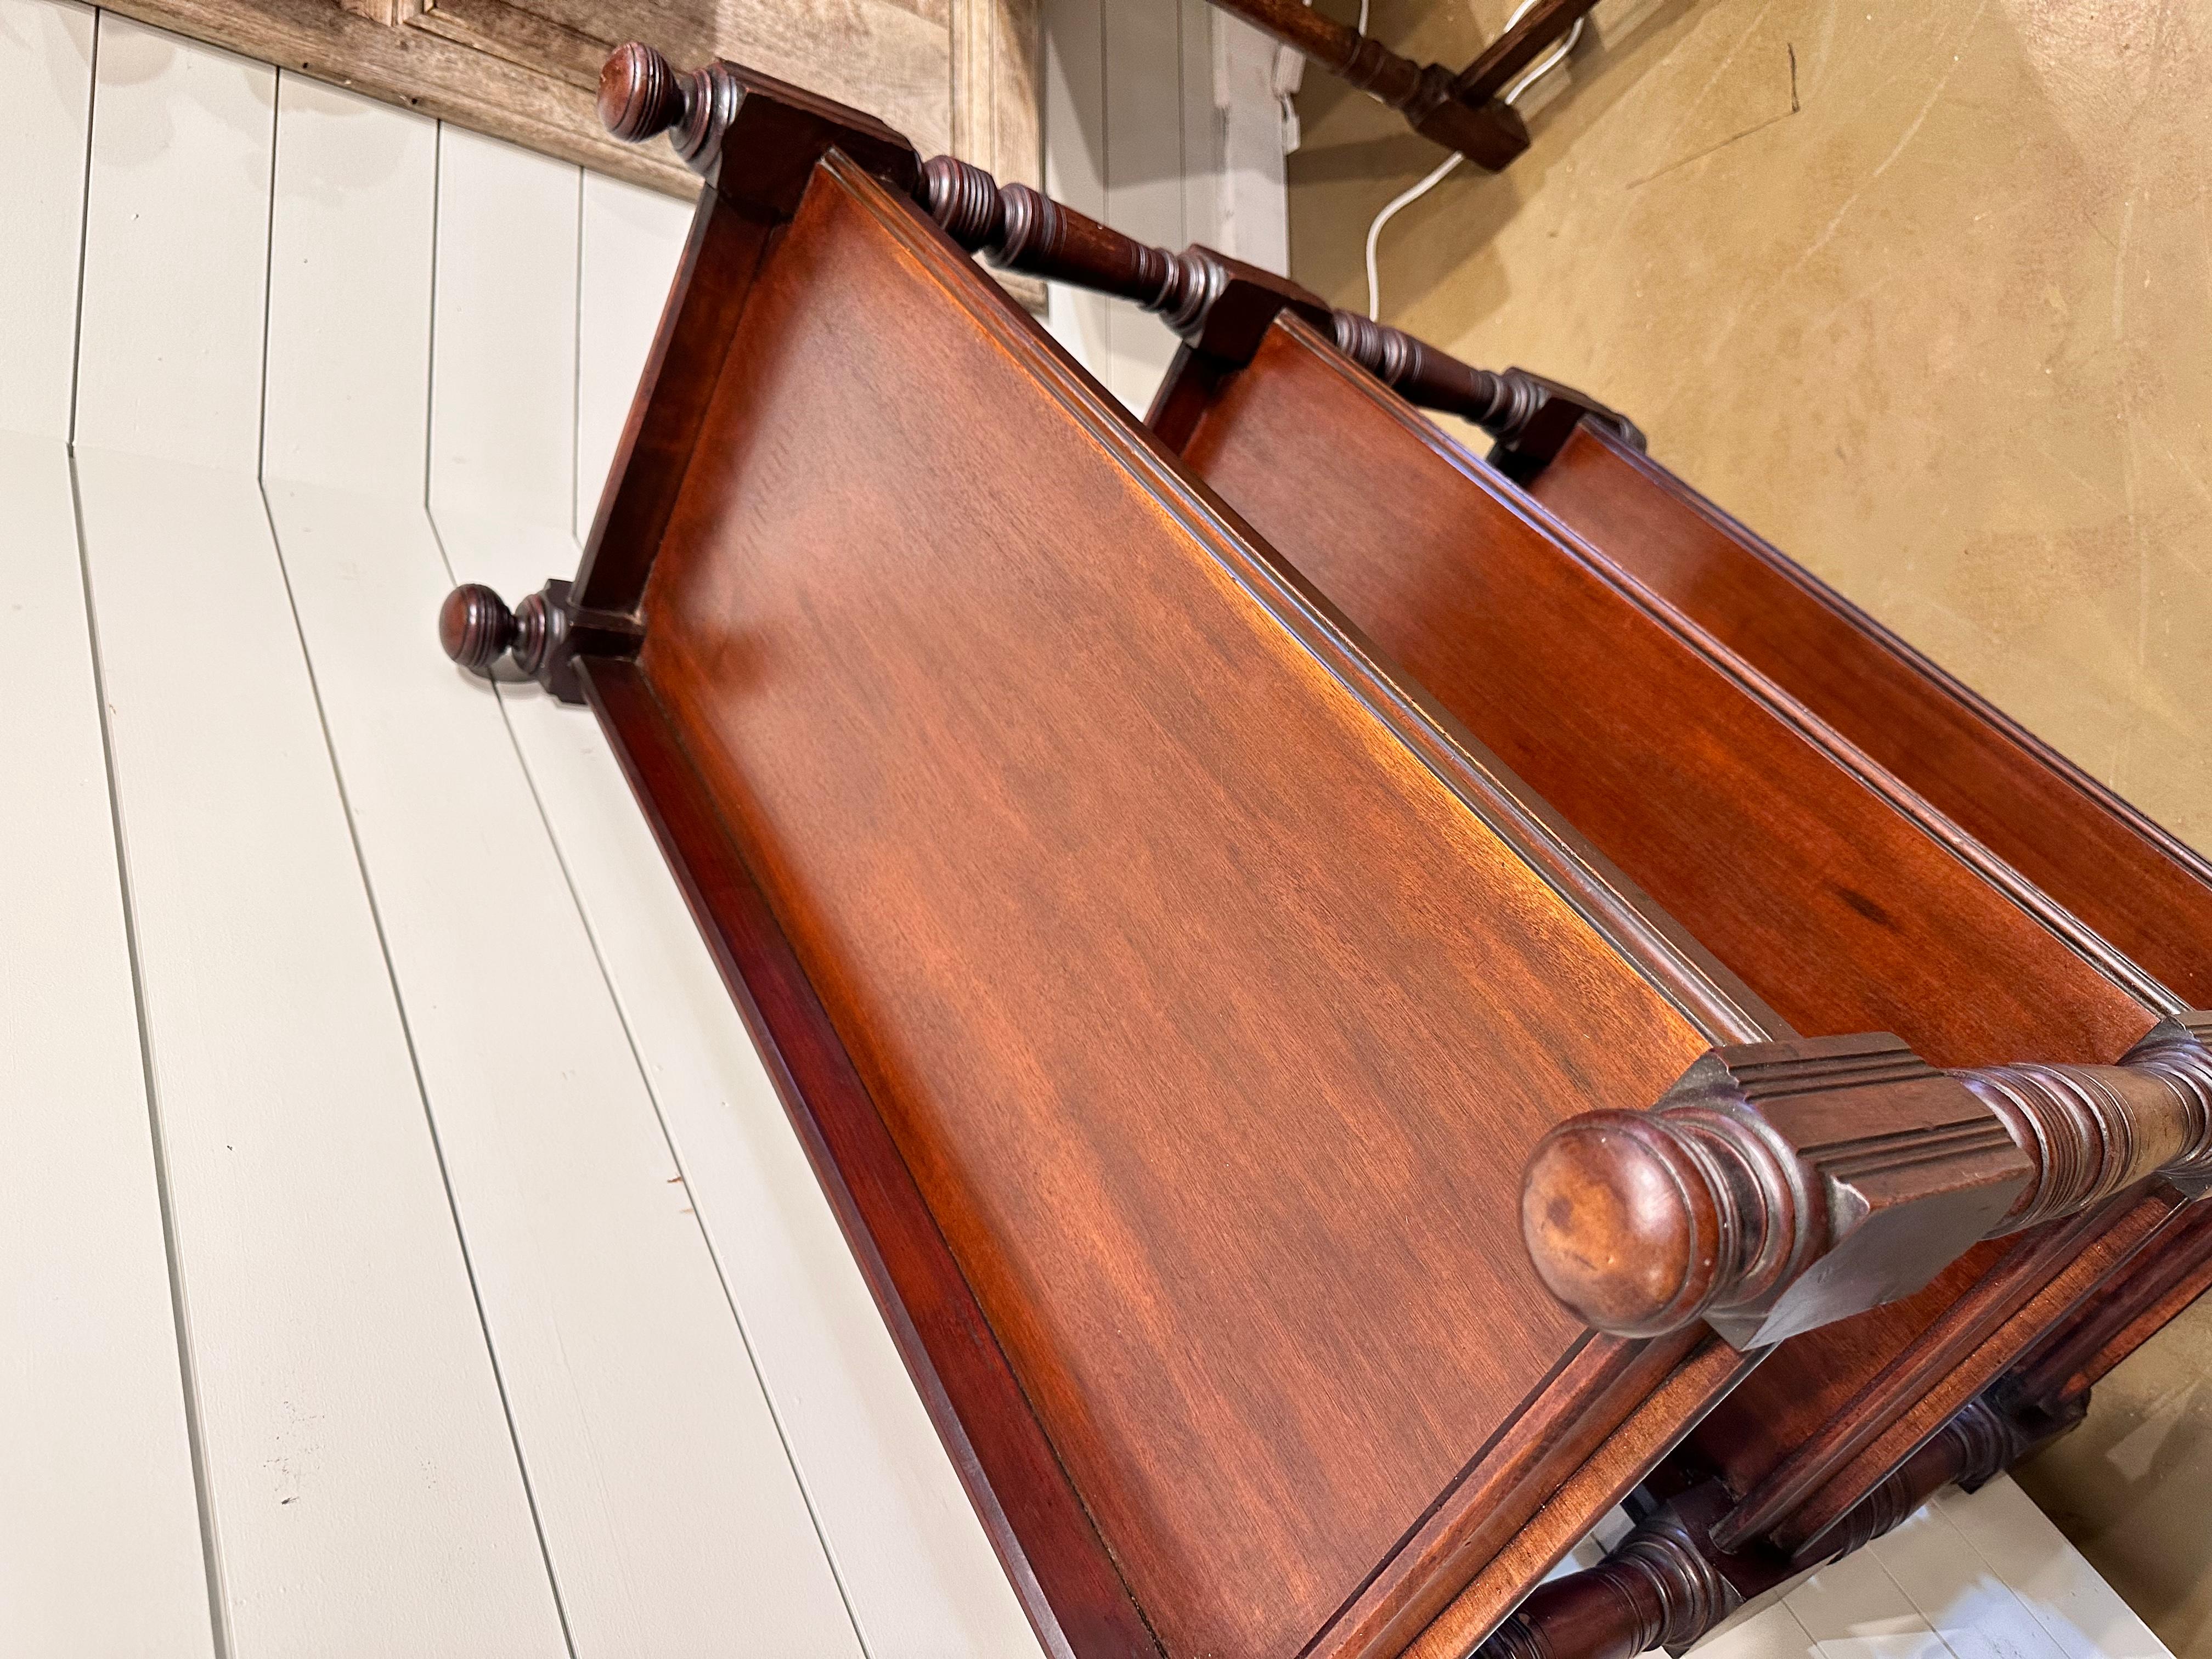 This is a beautiful 19th century English dumbwaiter! Three tier, wide shelves provide lots of room for storage! The wood is glossy and deep in color and character. Along with beautifully  turned legs.